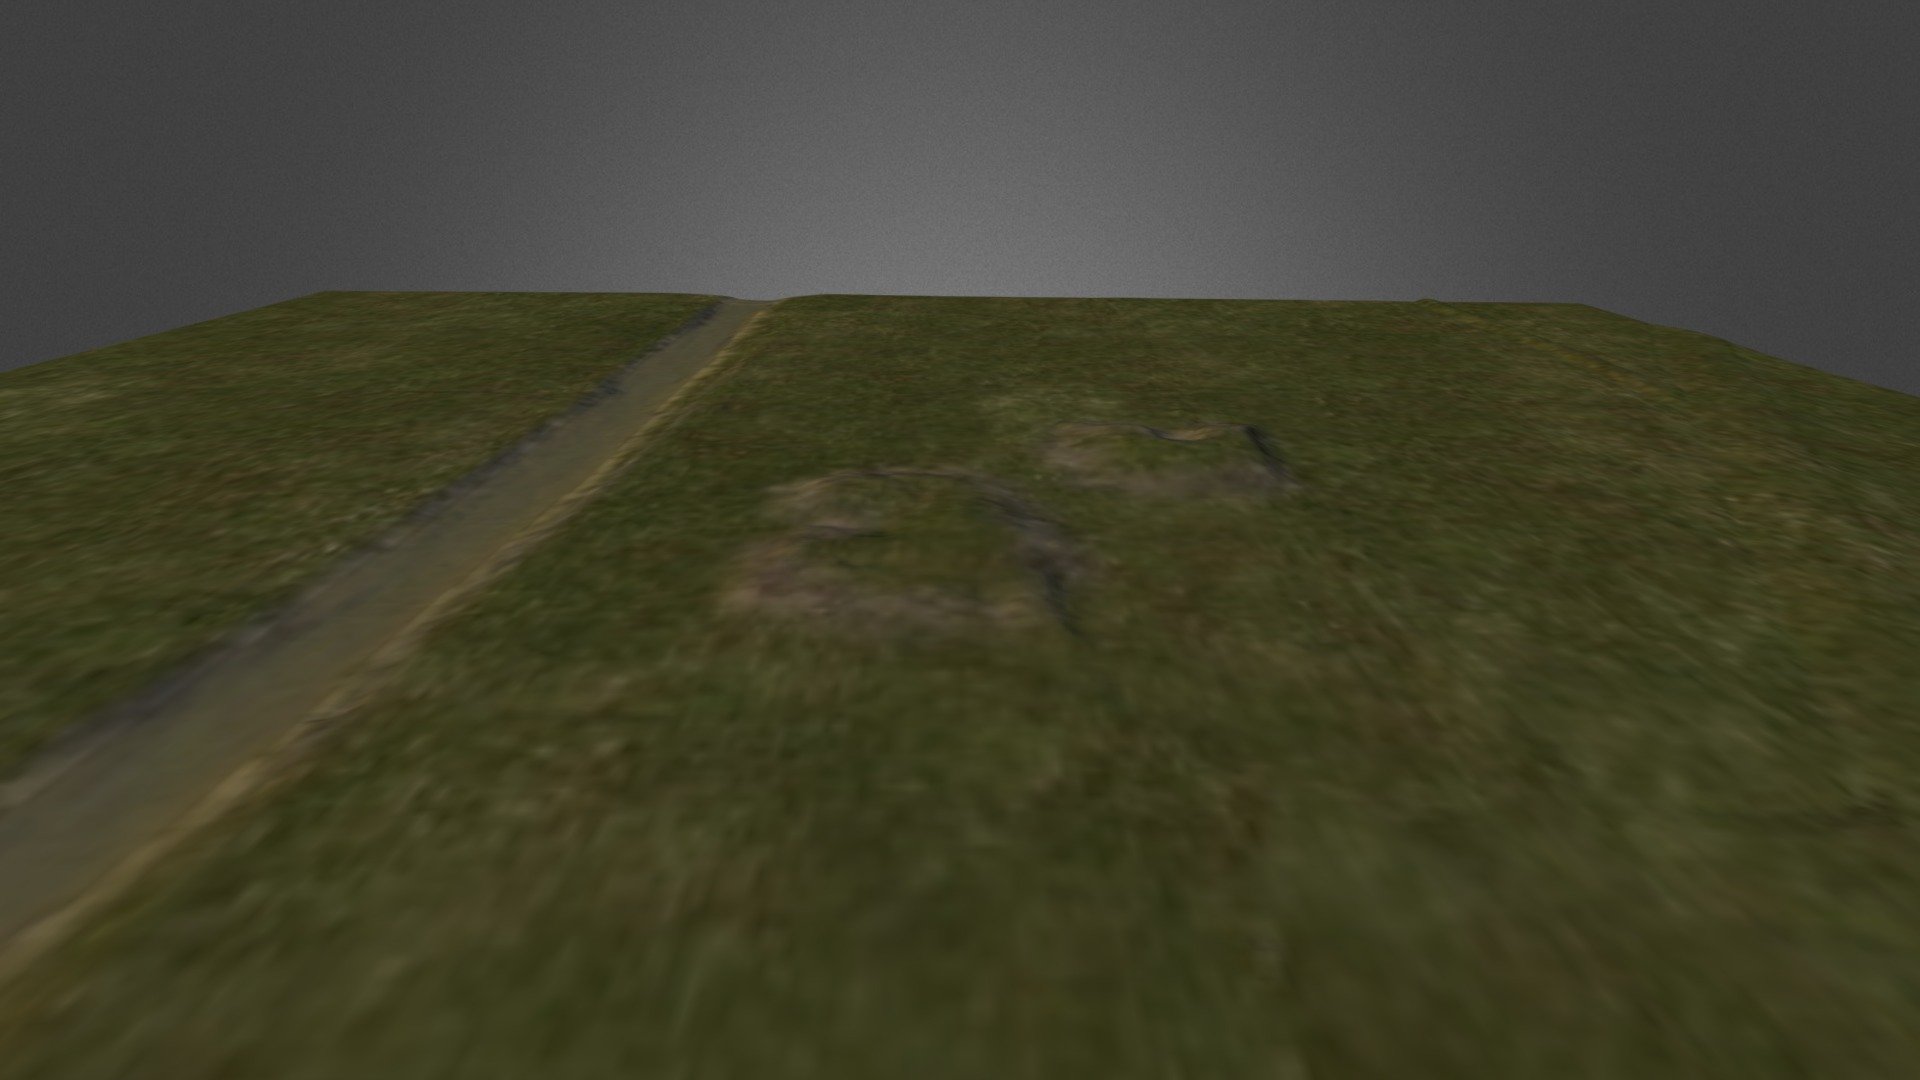 Simple terrain model of Rolling Fork Mound site in Mississippi. Created in L3DT from DEM data exported from ArcMap 3d model